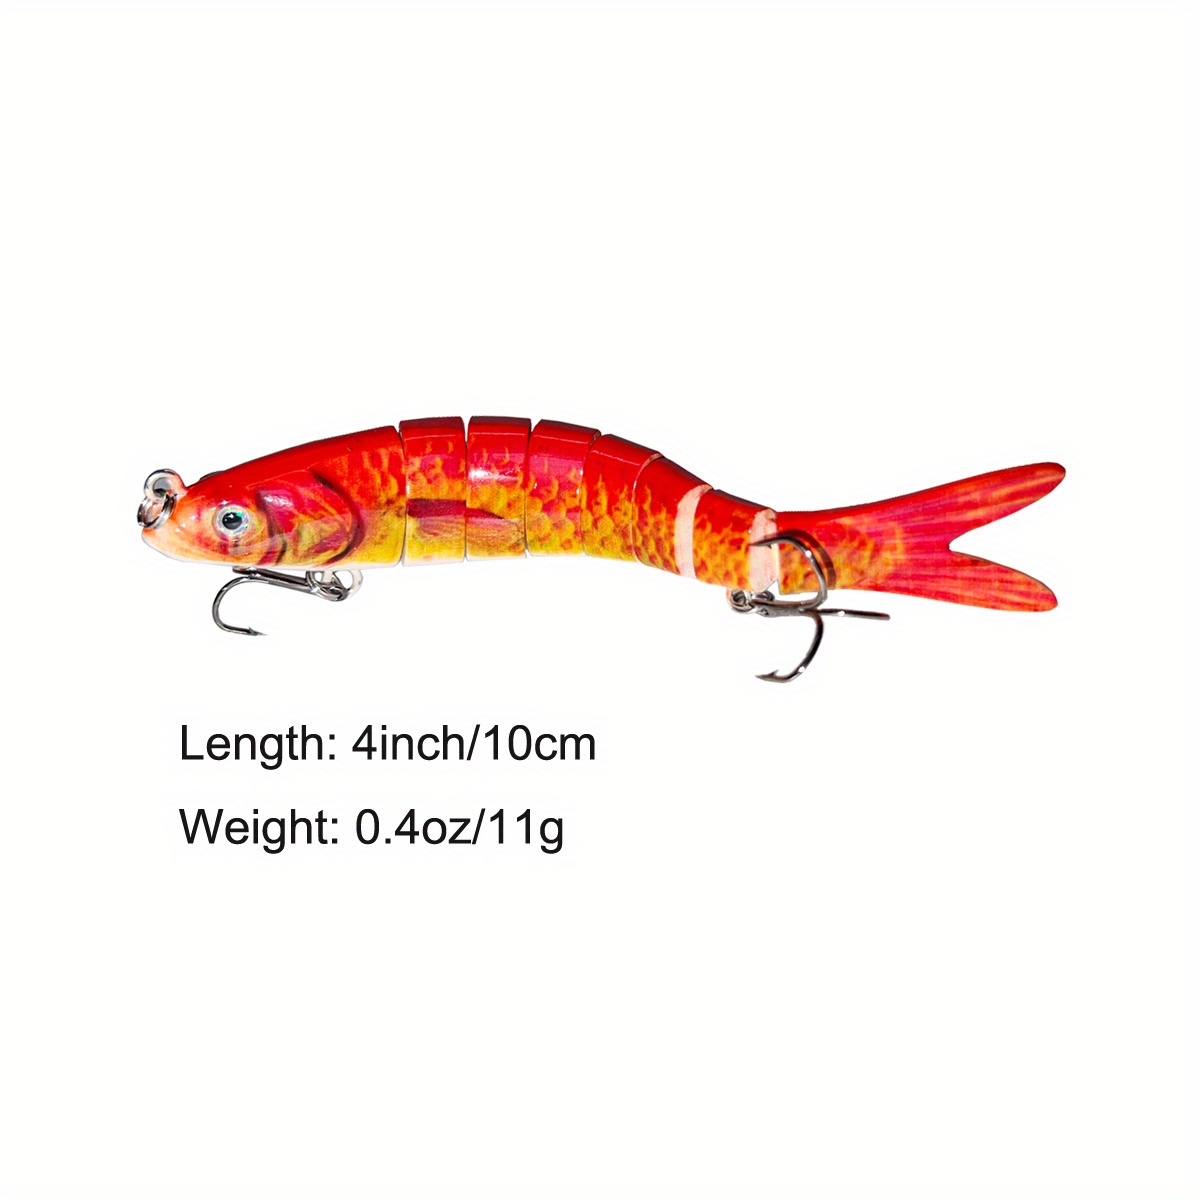  LKL 10pcs Fishing Lures Trout Bass Fishing Gear Lures Lead Fish  Weights Bait Realistic Fish Body Artificial Fishing Bait for Freshwater  Saltwater (Color : Back Luminous Stripe, Size : 30G) 